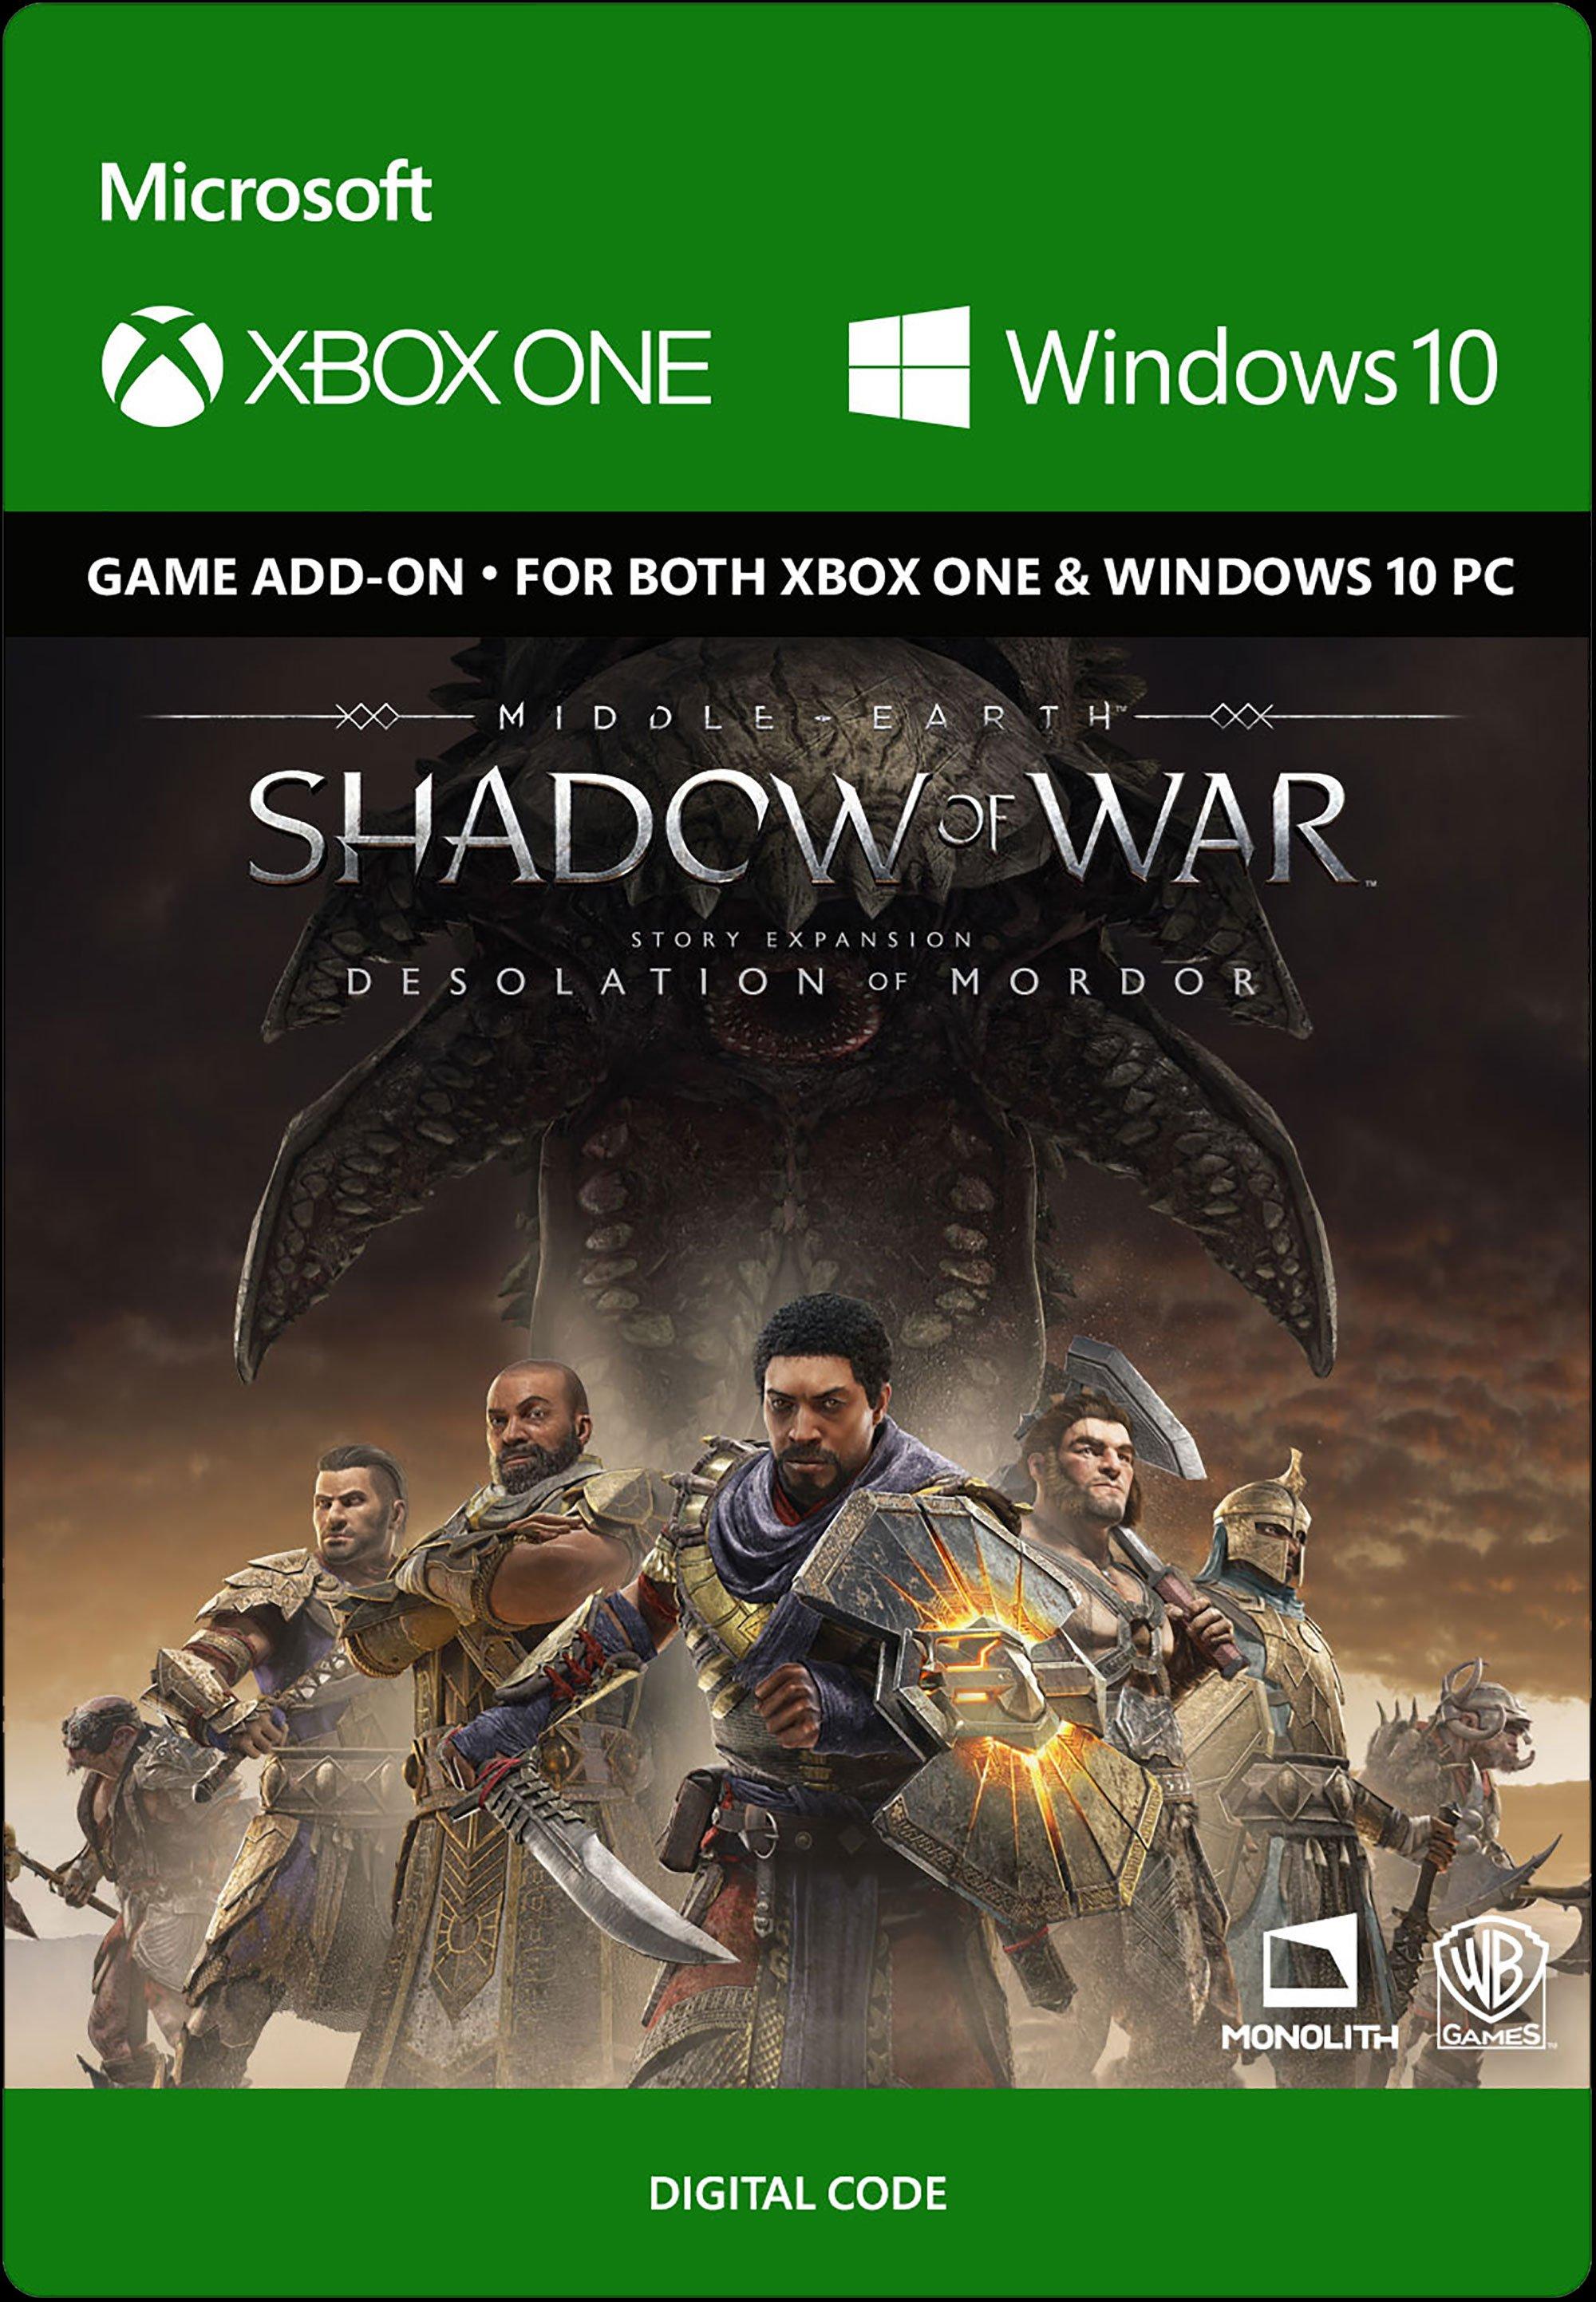 Middle-earth: Shadow of War Desolation of Mordor Story Expansion DLC - Xbox One